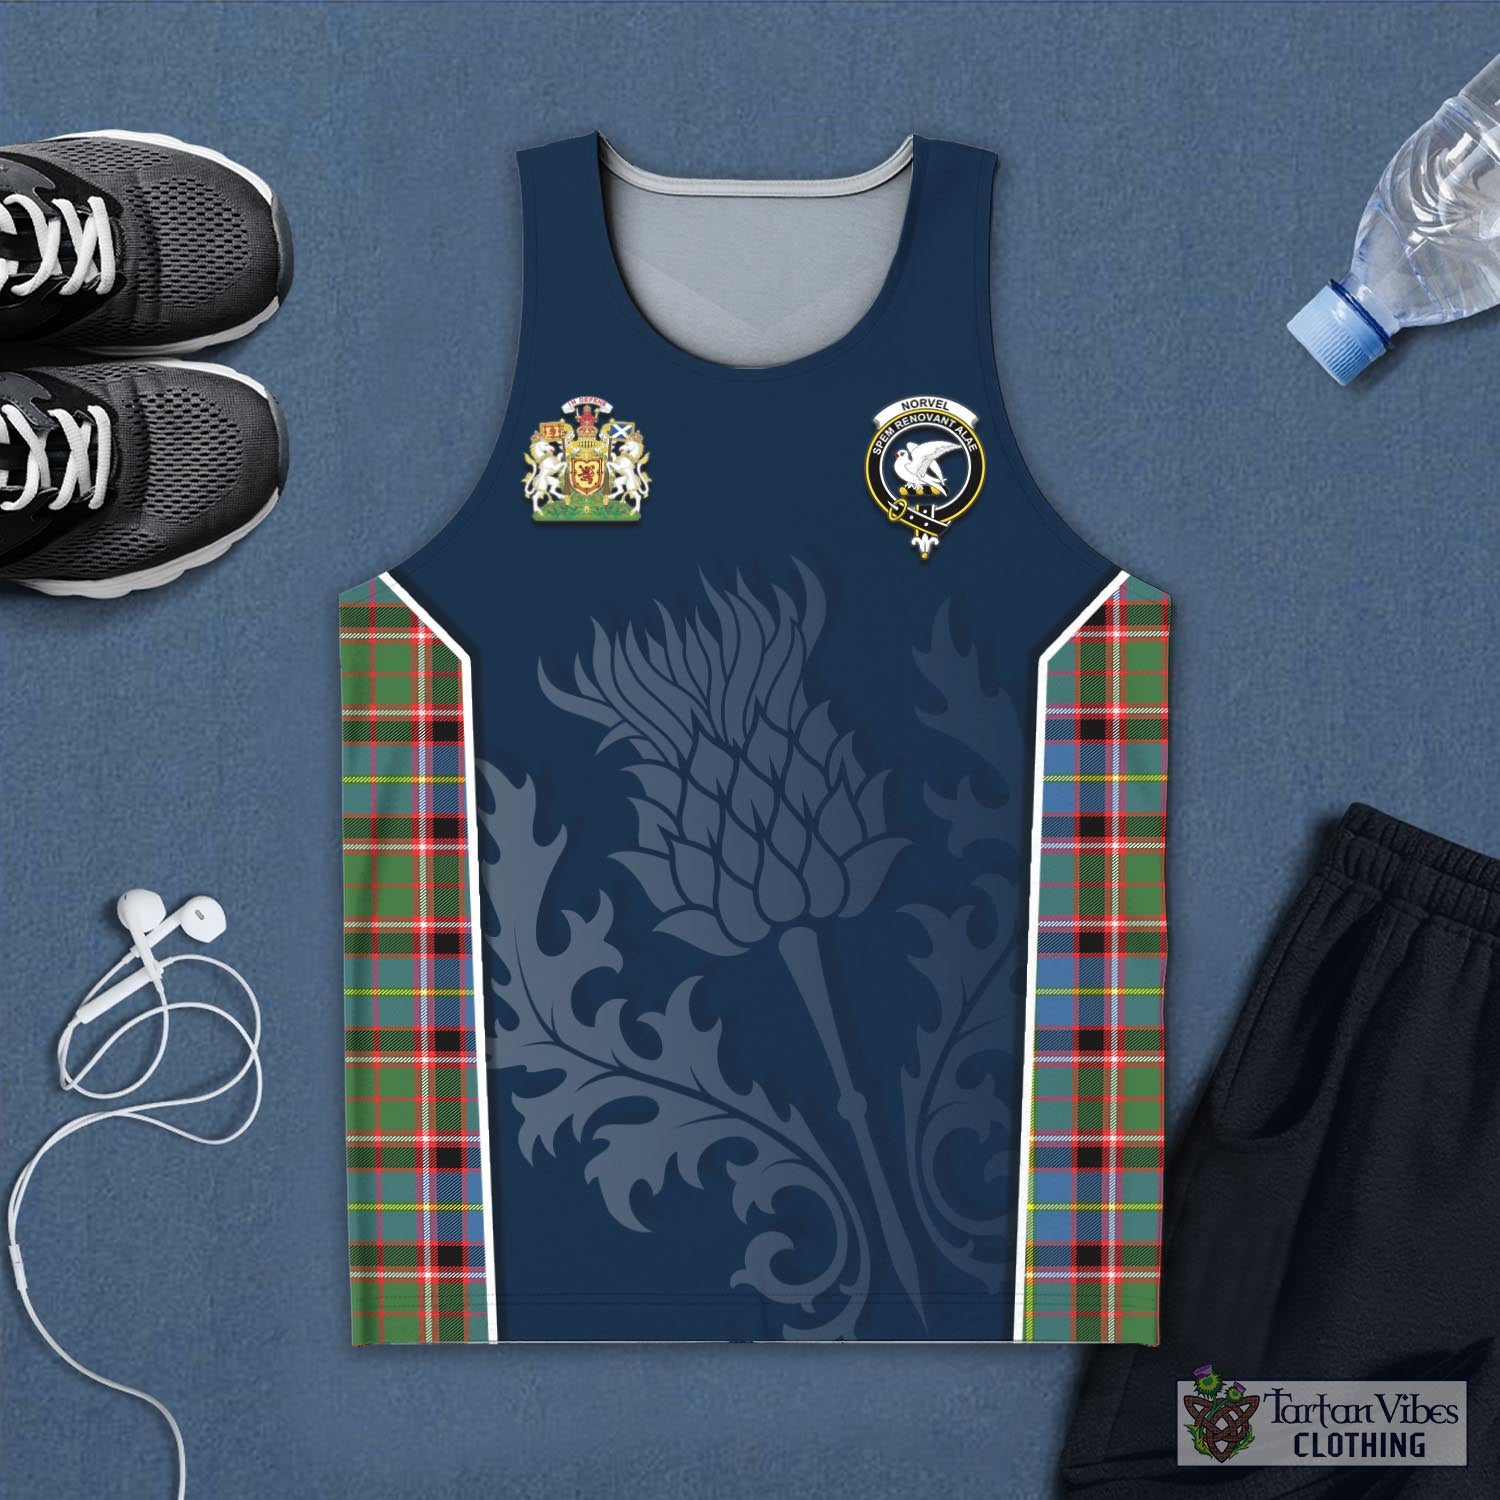 Tartan Vibes Clothing Norvel Tartan Men's Tanks Top with Family Crest and Scottish Thistle Vibes Sport Style